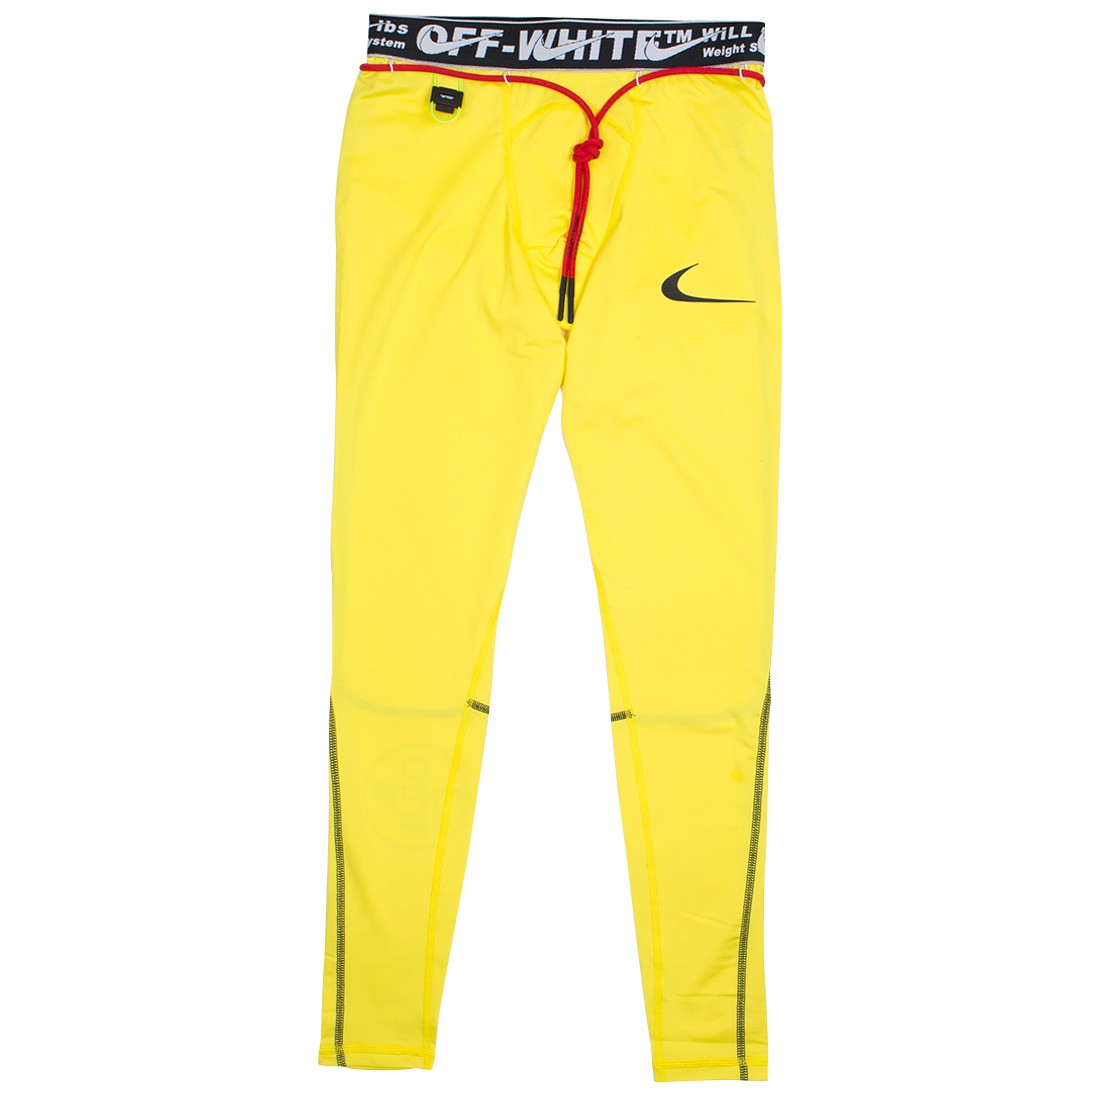 nike off white tights